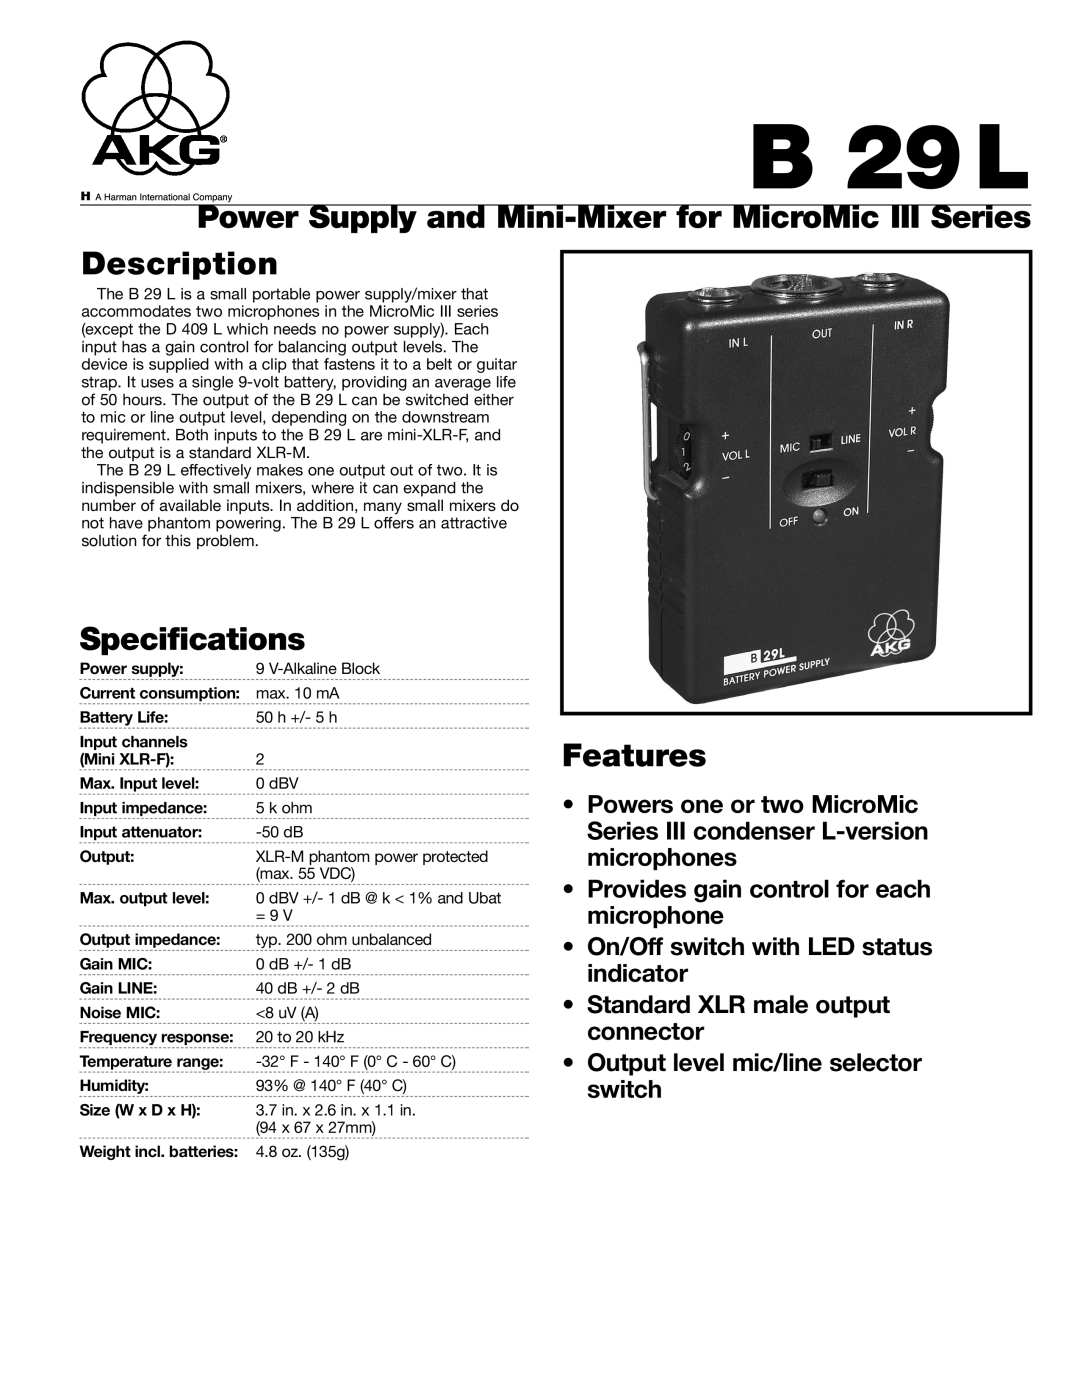 AKG Acoustics B 29L specifications Power Supply and Mini-Mixer for MicroMic III Series Description, Specifications 